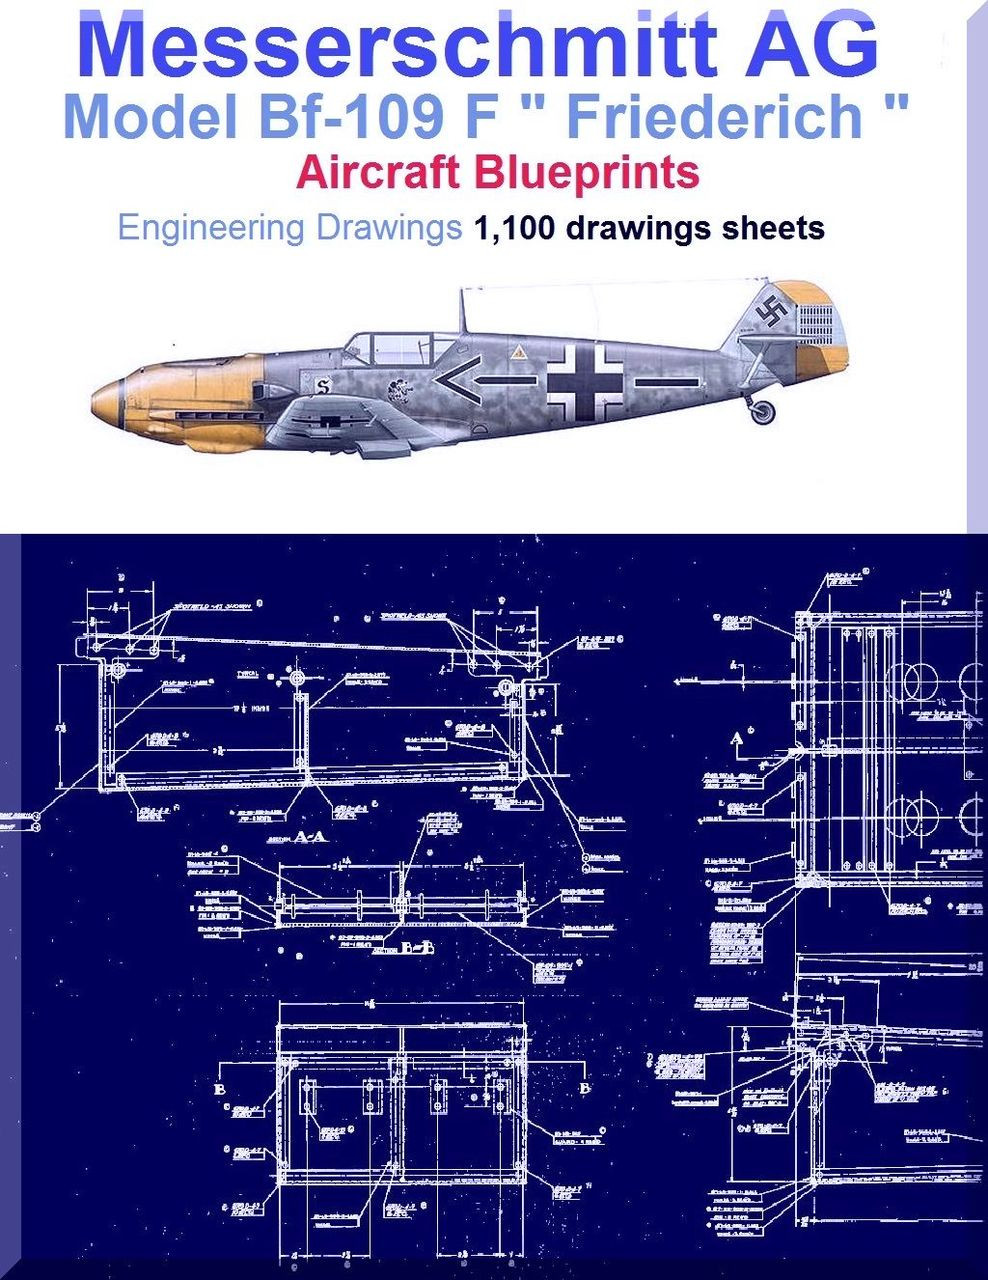 Messerschmitt Bf 109 F Aircraft Blueprints Engineering Drawings Dvd Aircraft Reports Aircraft Manuals Aircraft Helicopter Engines Propellers Blueprints Publications